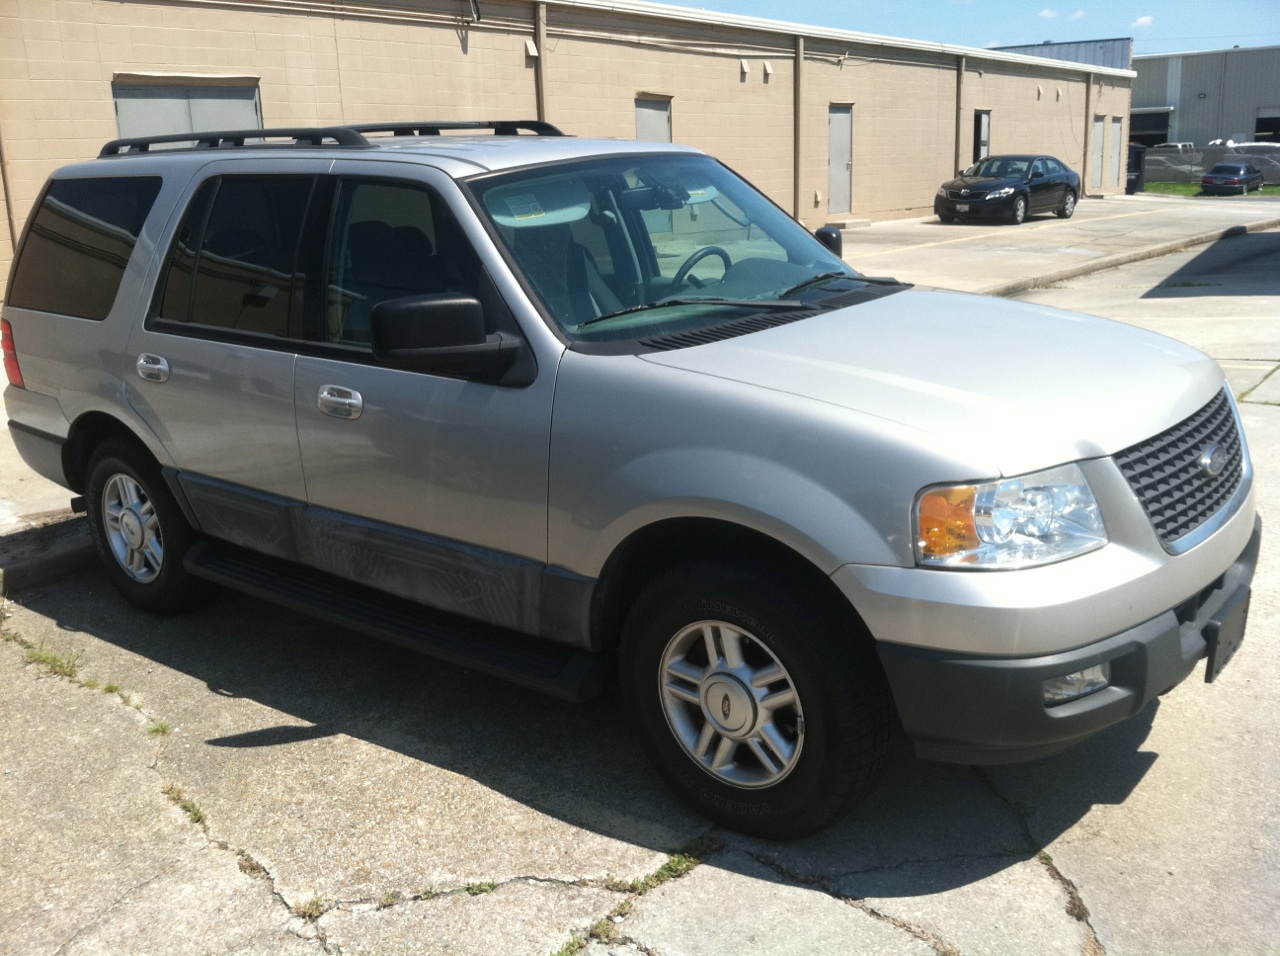 2006 Ford expedition xlt review #2